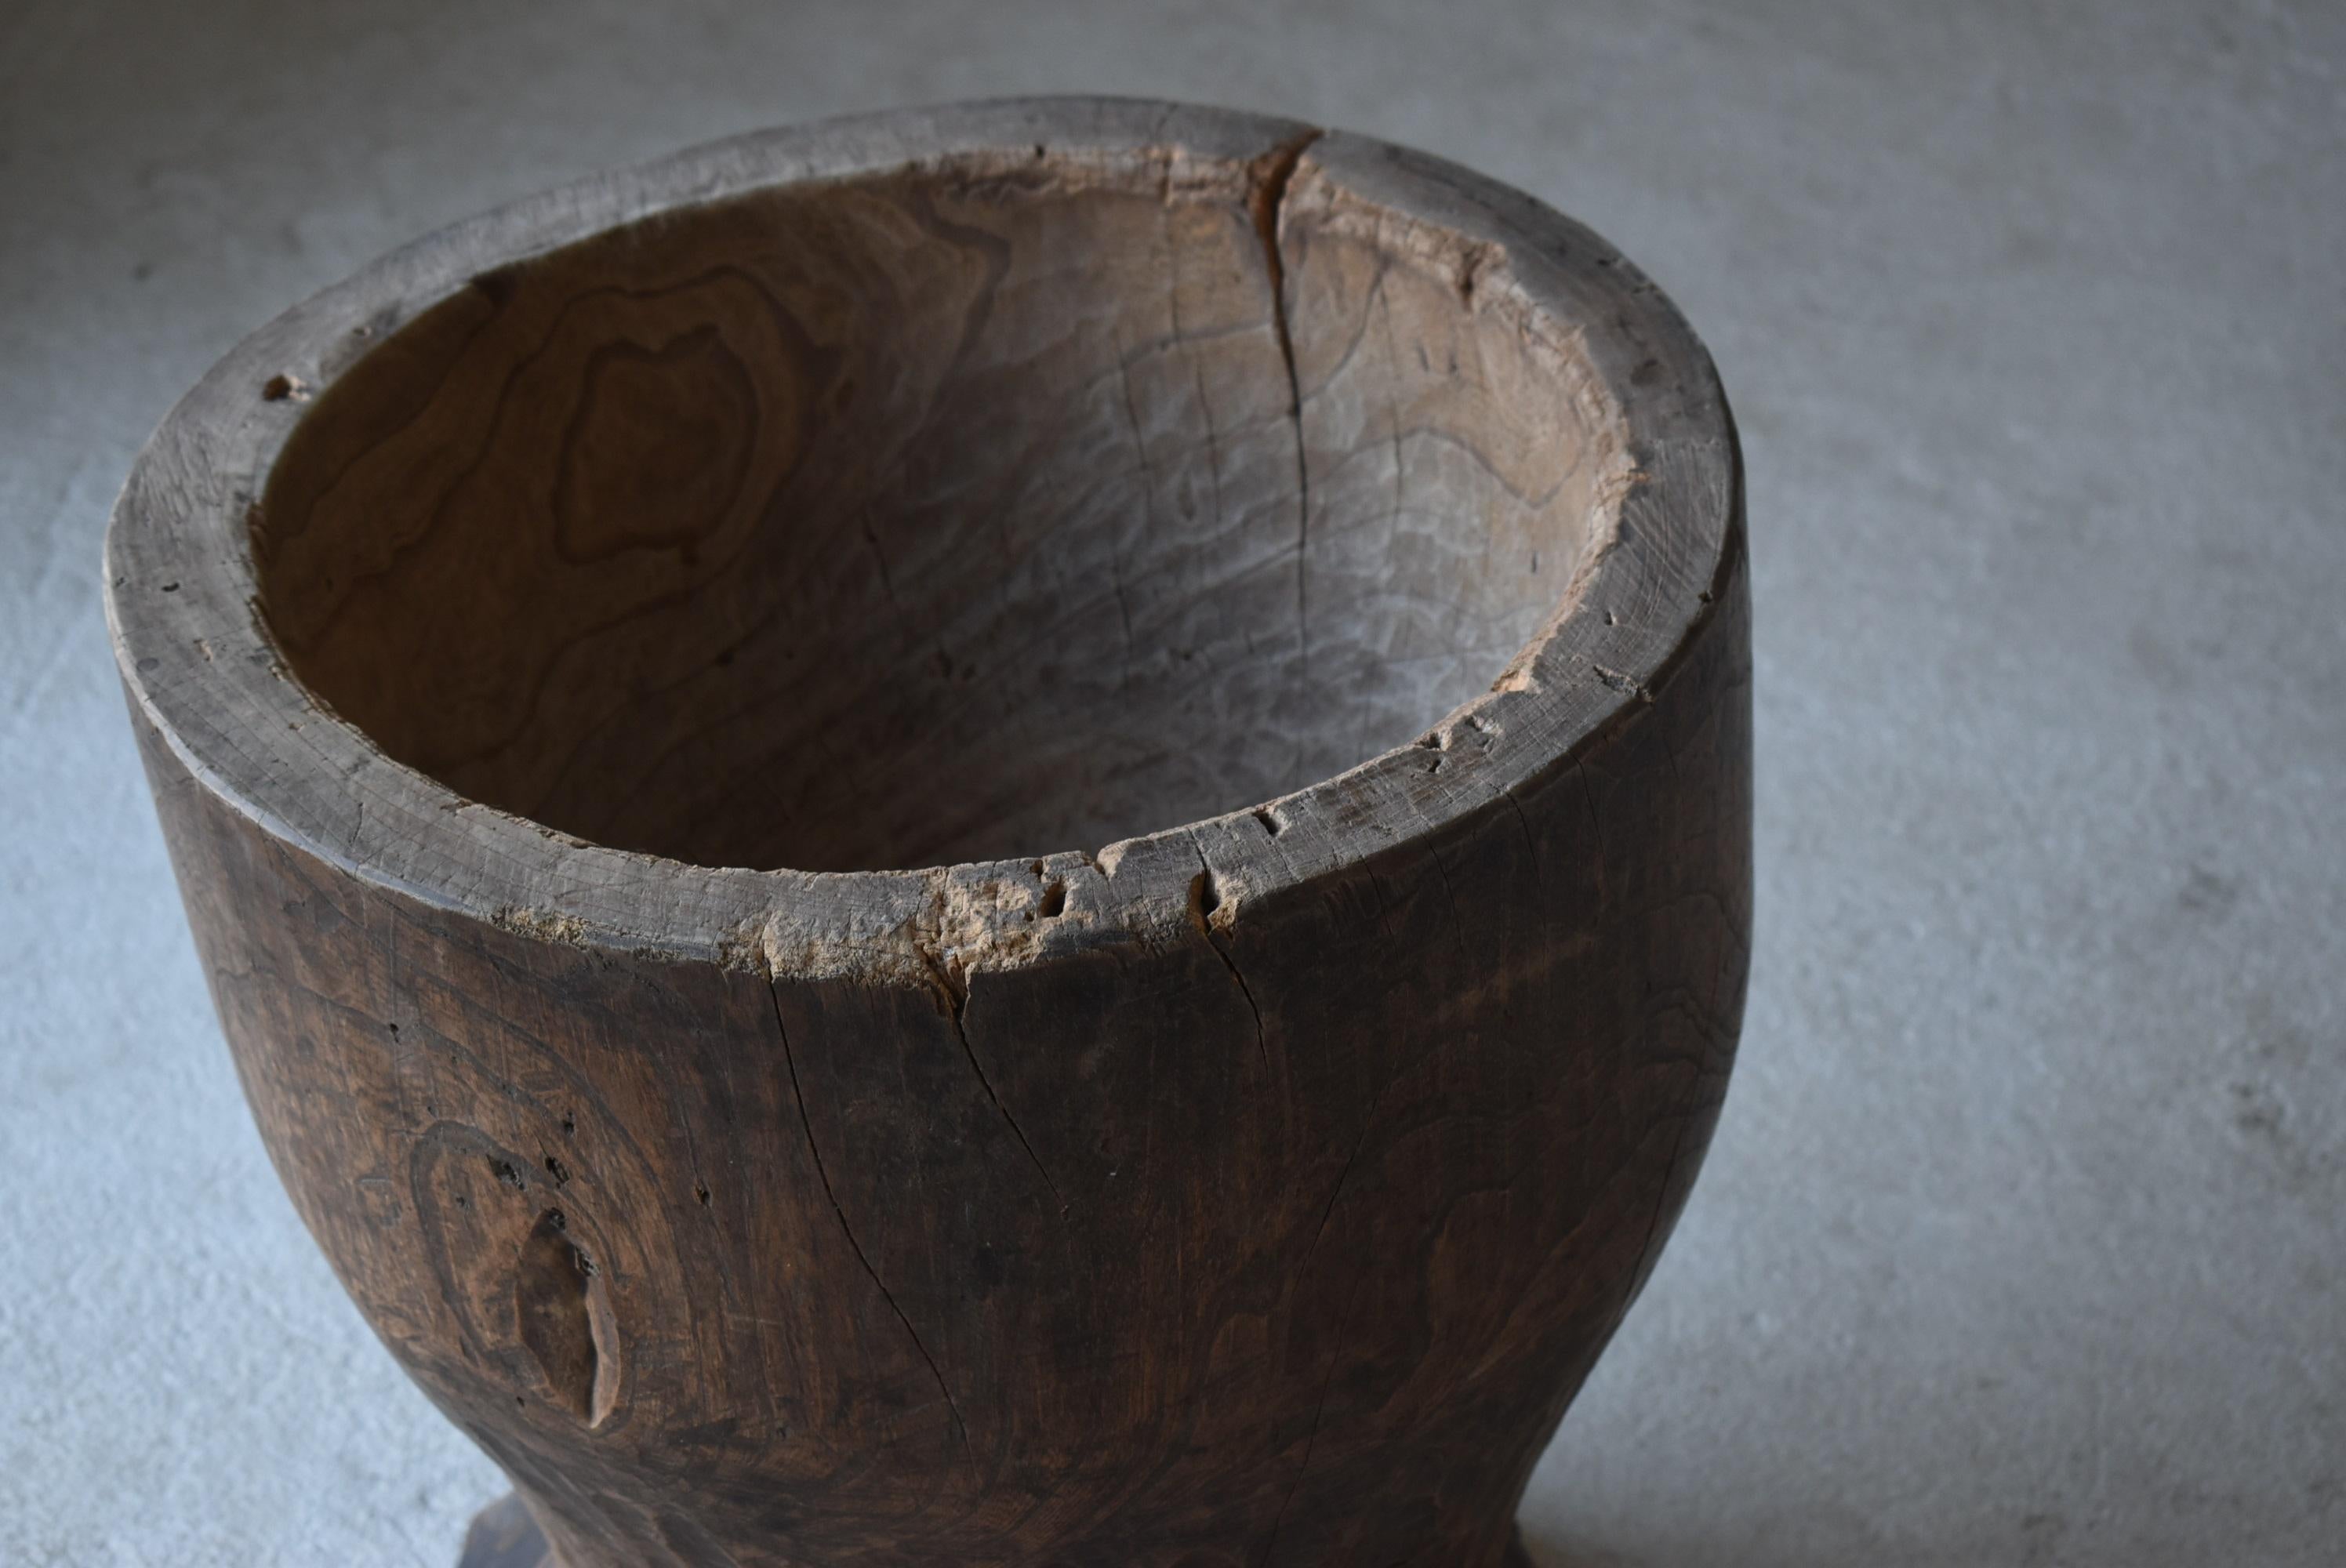 Old Japanese wooden mortar.
It is from the Meiji era (1860-1900s).
The material is zelkova.

It is a shape that is born only in the Tohoku region.
It's very rare.
It has a good shape and beautiful wood shades.

It weighs 22.5 kg.

It is